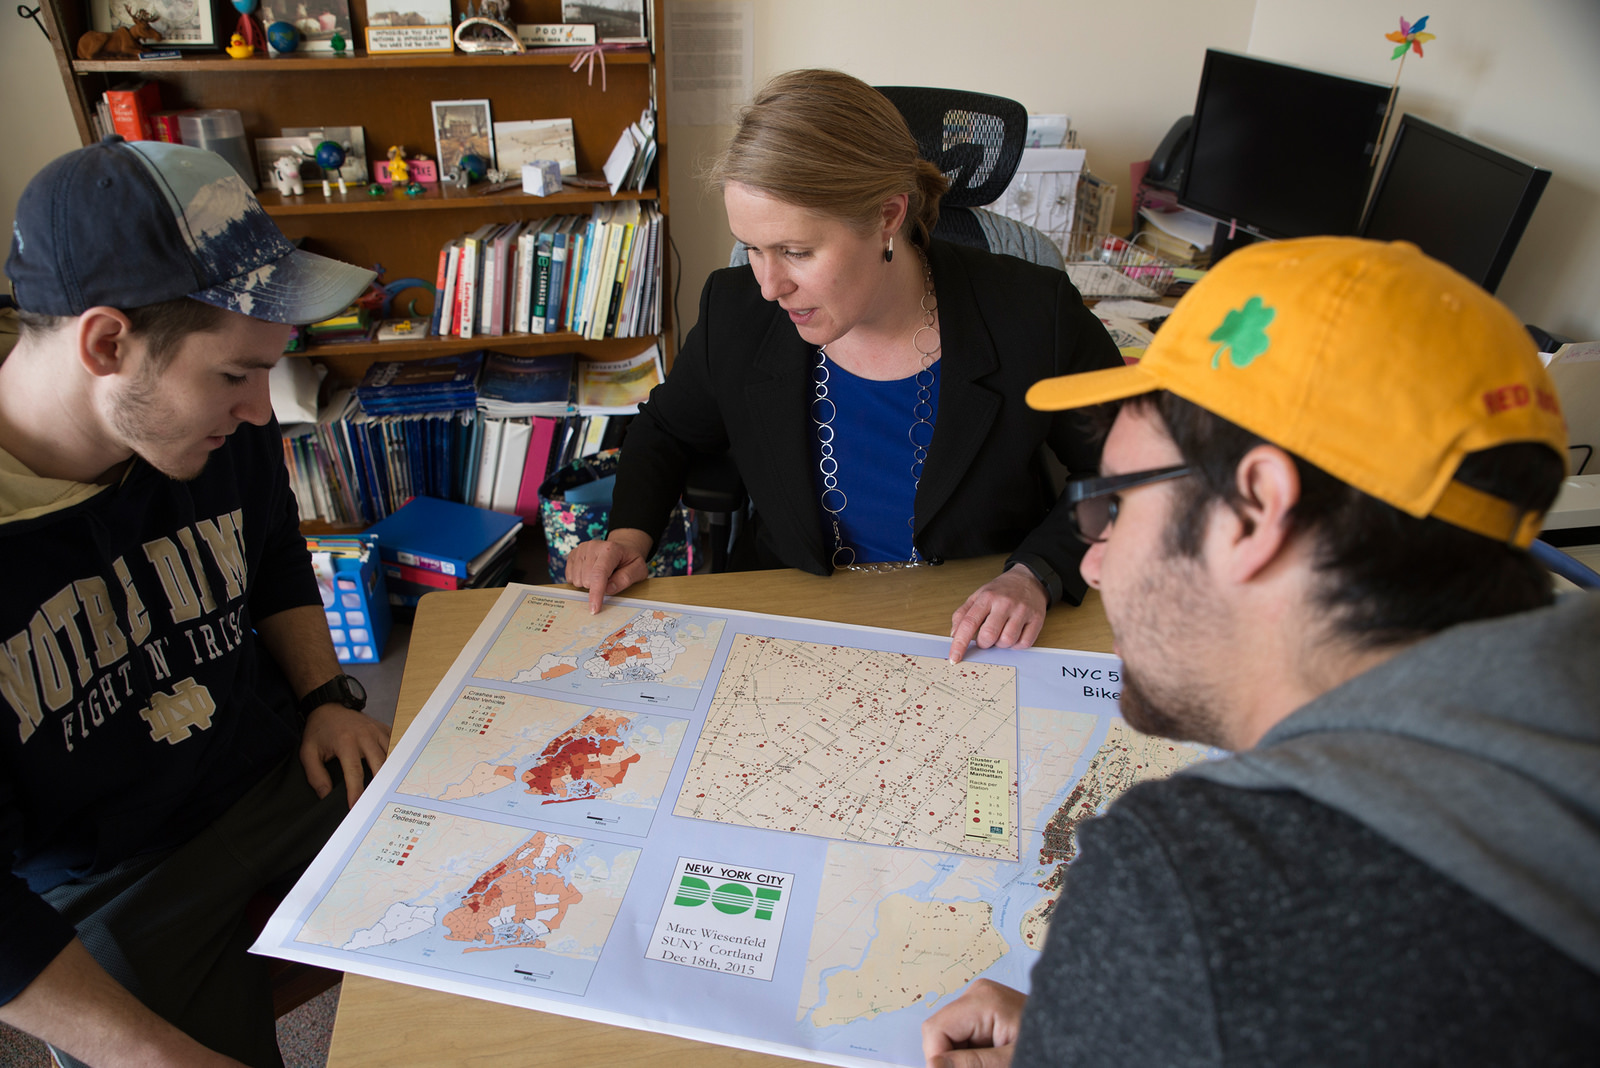 Students and professor looking at a map